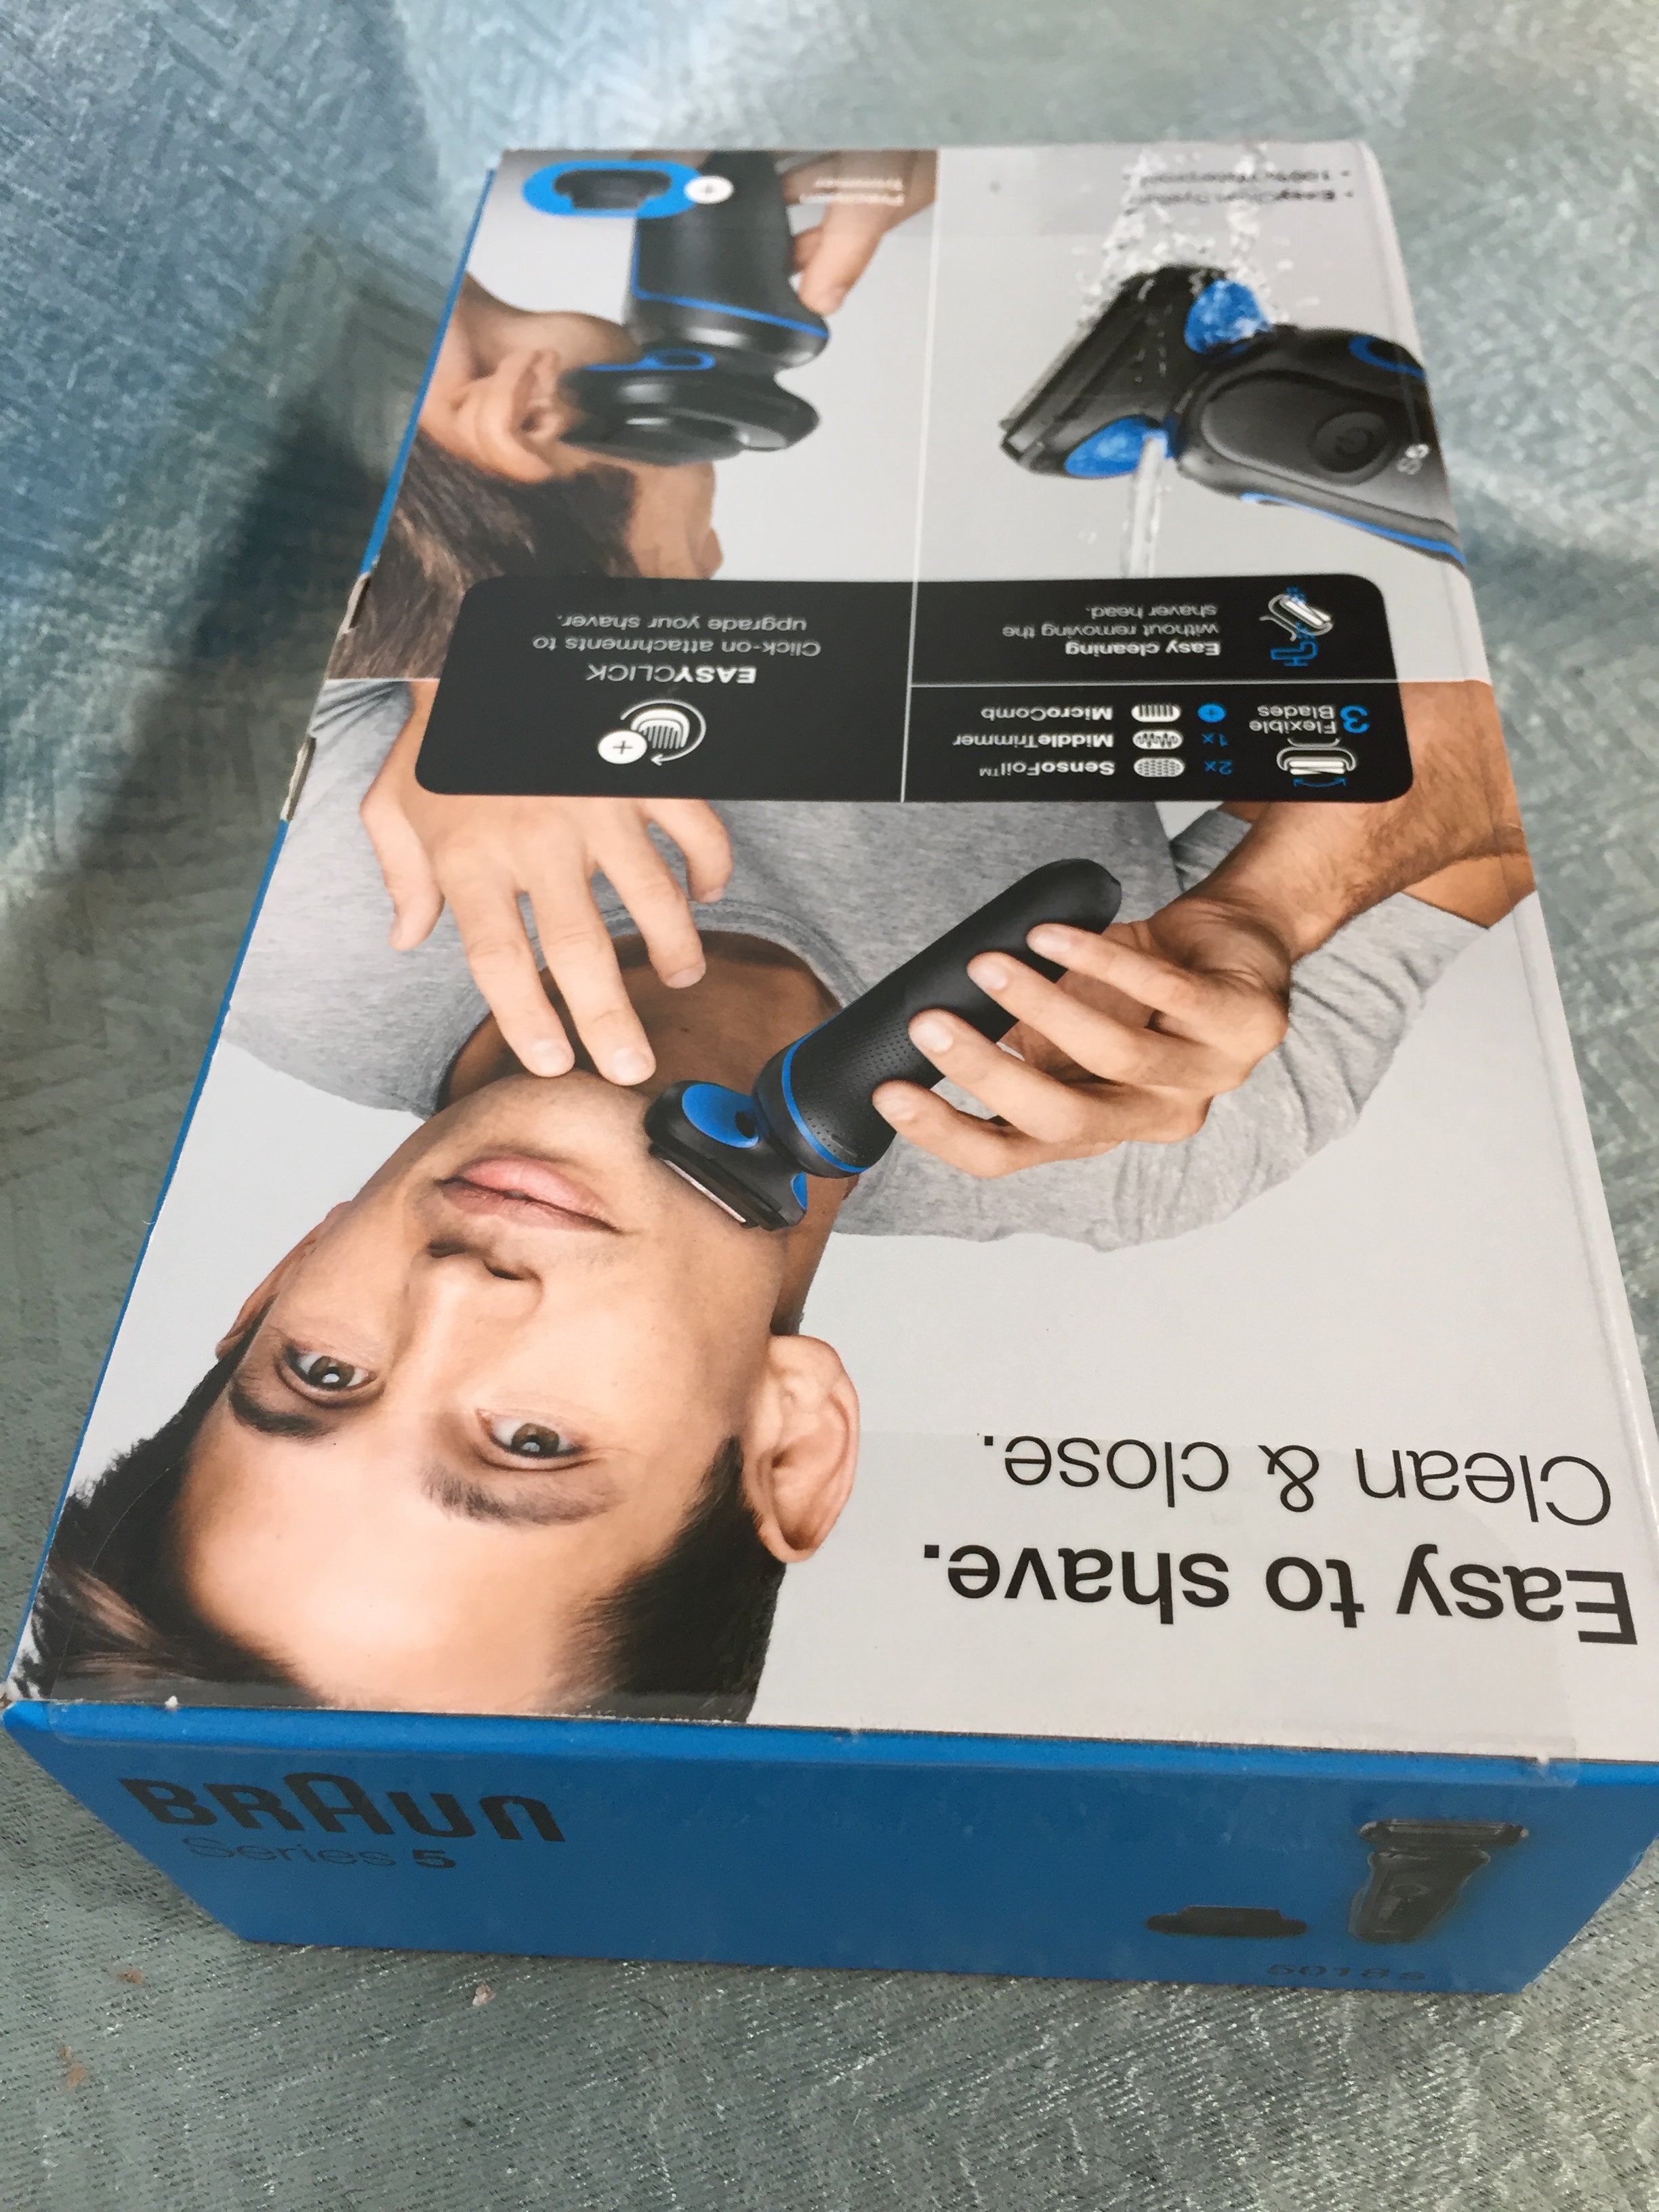 Braun Series 5 5018s Electric Foil Shaver/Precision Beard Trimmer Wet&Dry (7611408941294)